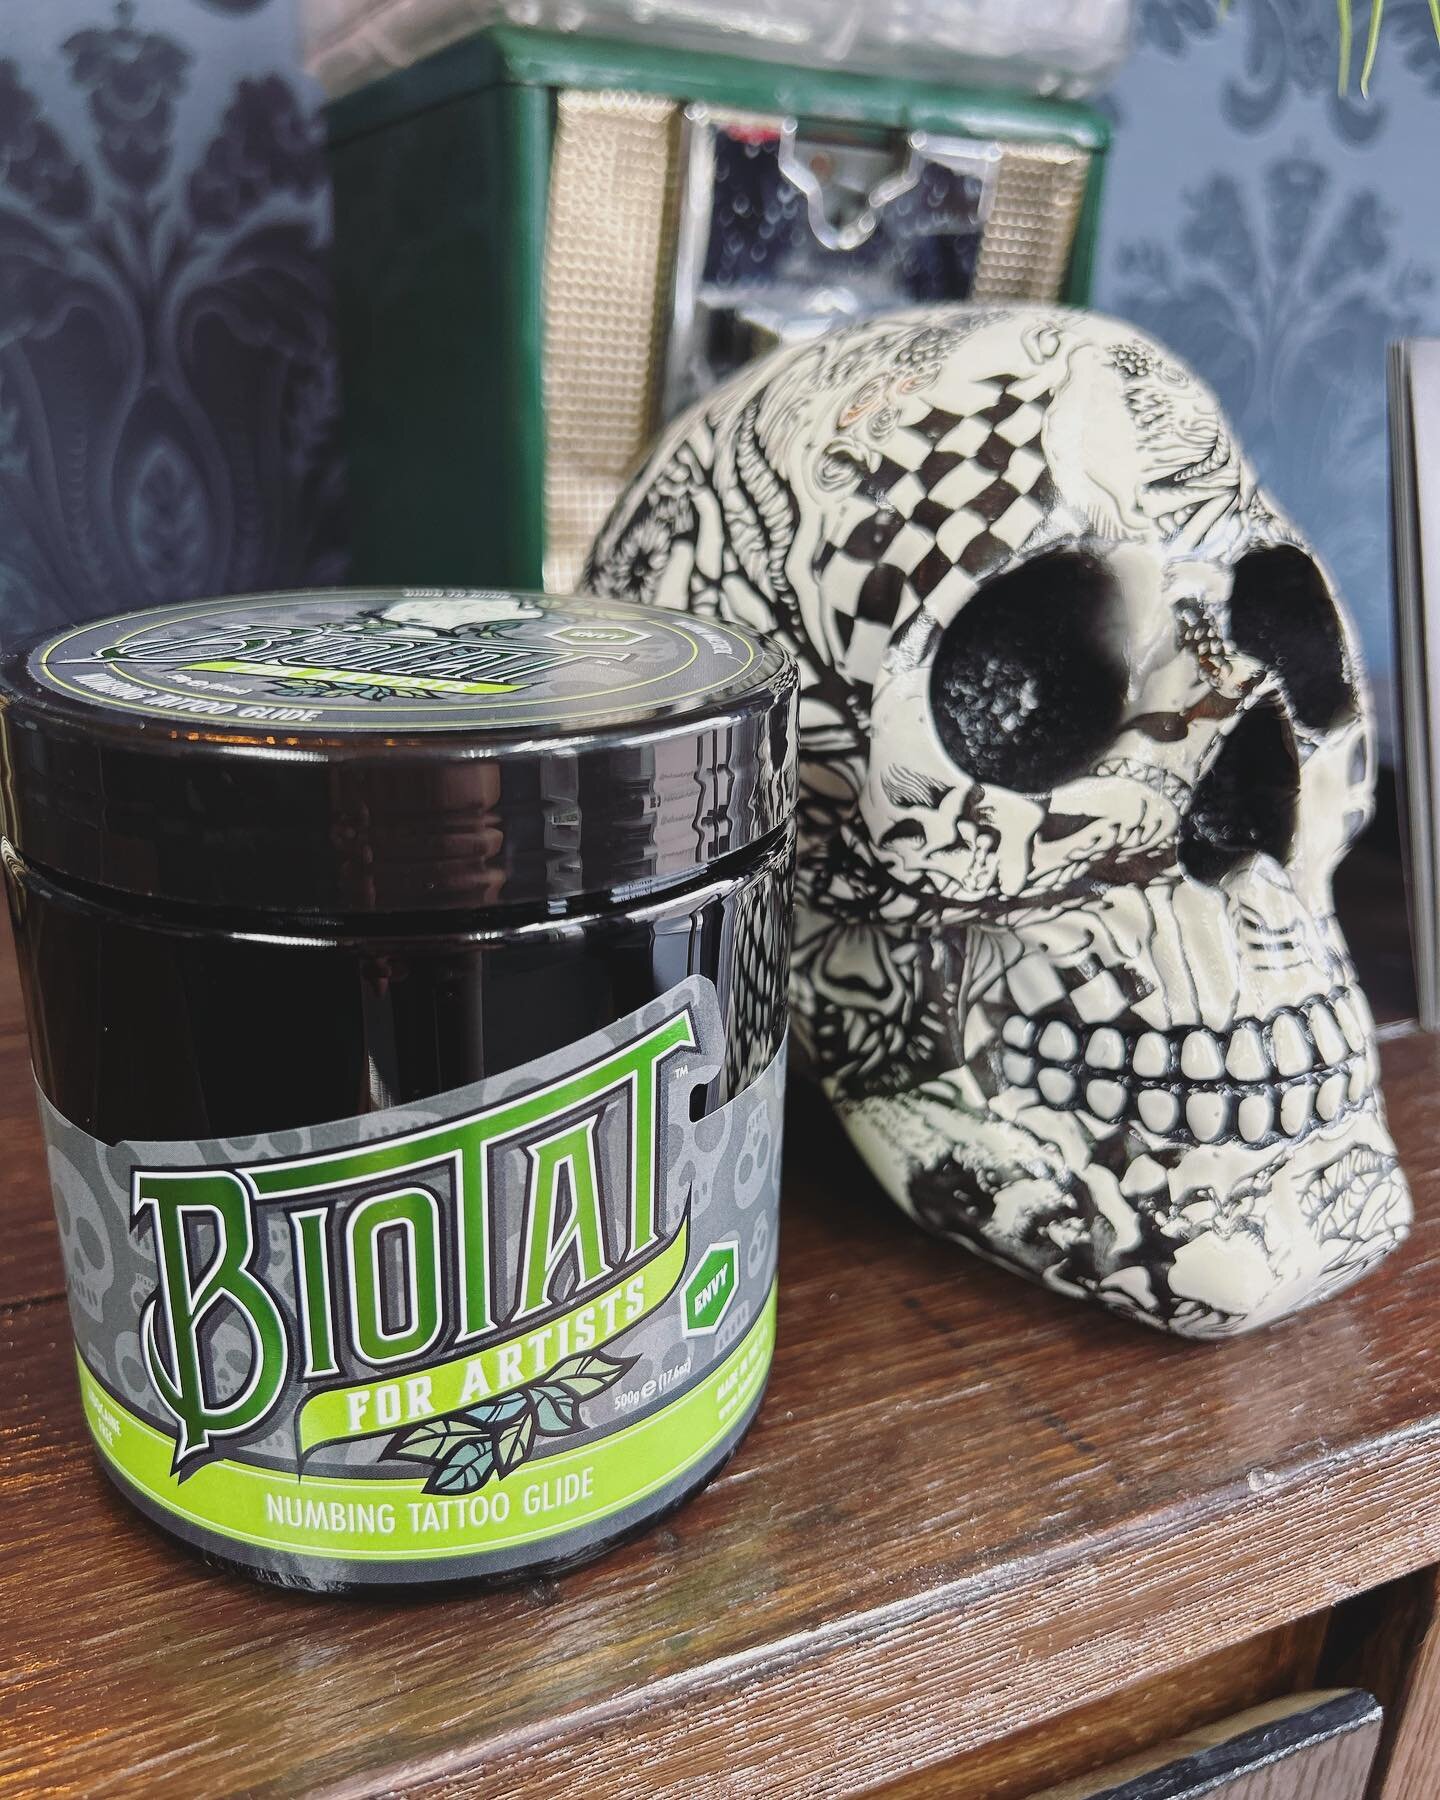 We&rsquo;re already embracing the spooky season with our Envy @biotat_ glide&hellip;..🕷️💚 #greenwithenvy 

💀Amazing glide that soothes the skin during the tattoo process

💀Natural numbing using the awesome power of clove oil 

💀No nasties - an a